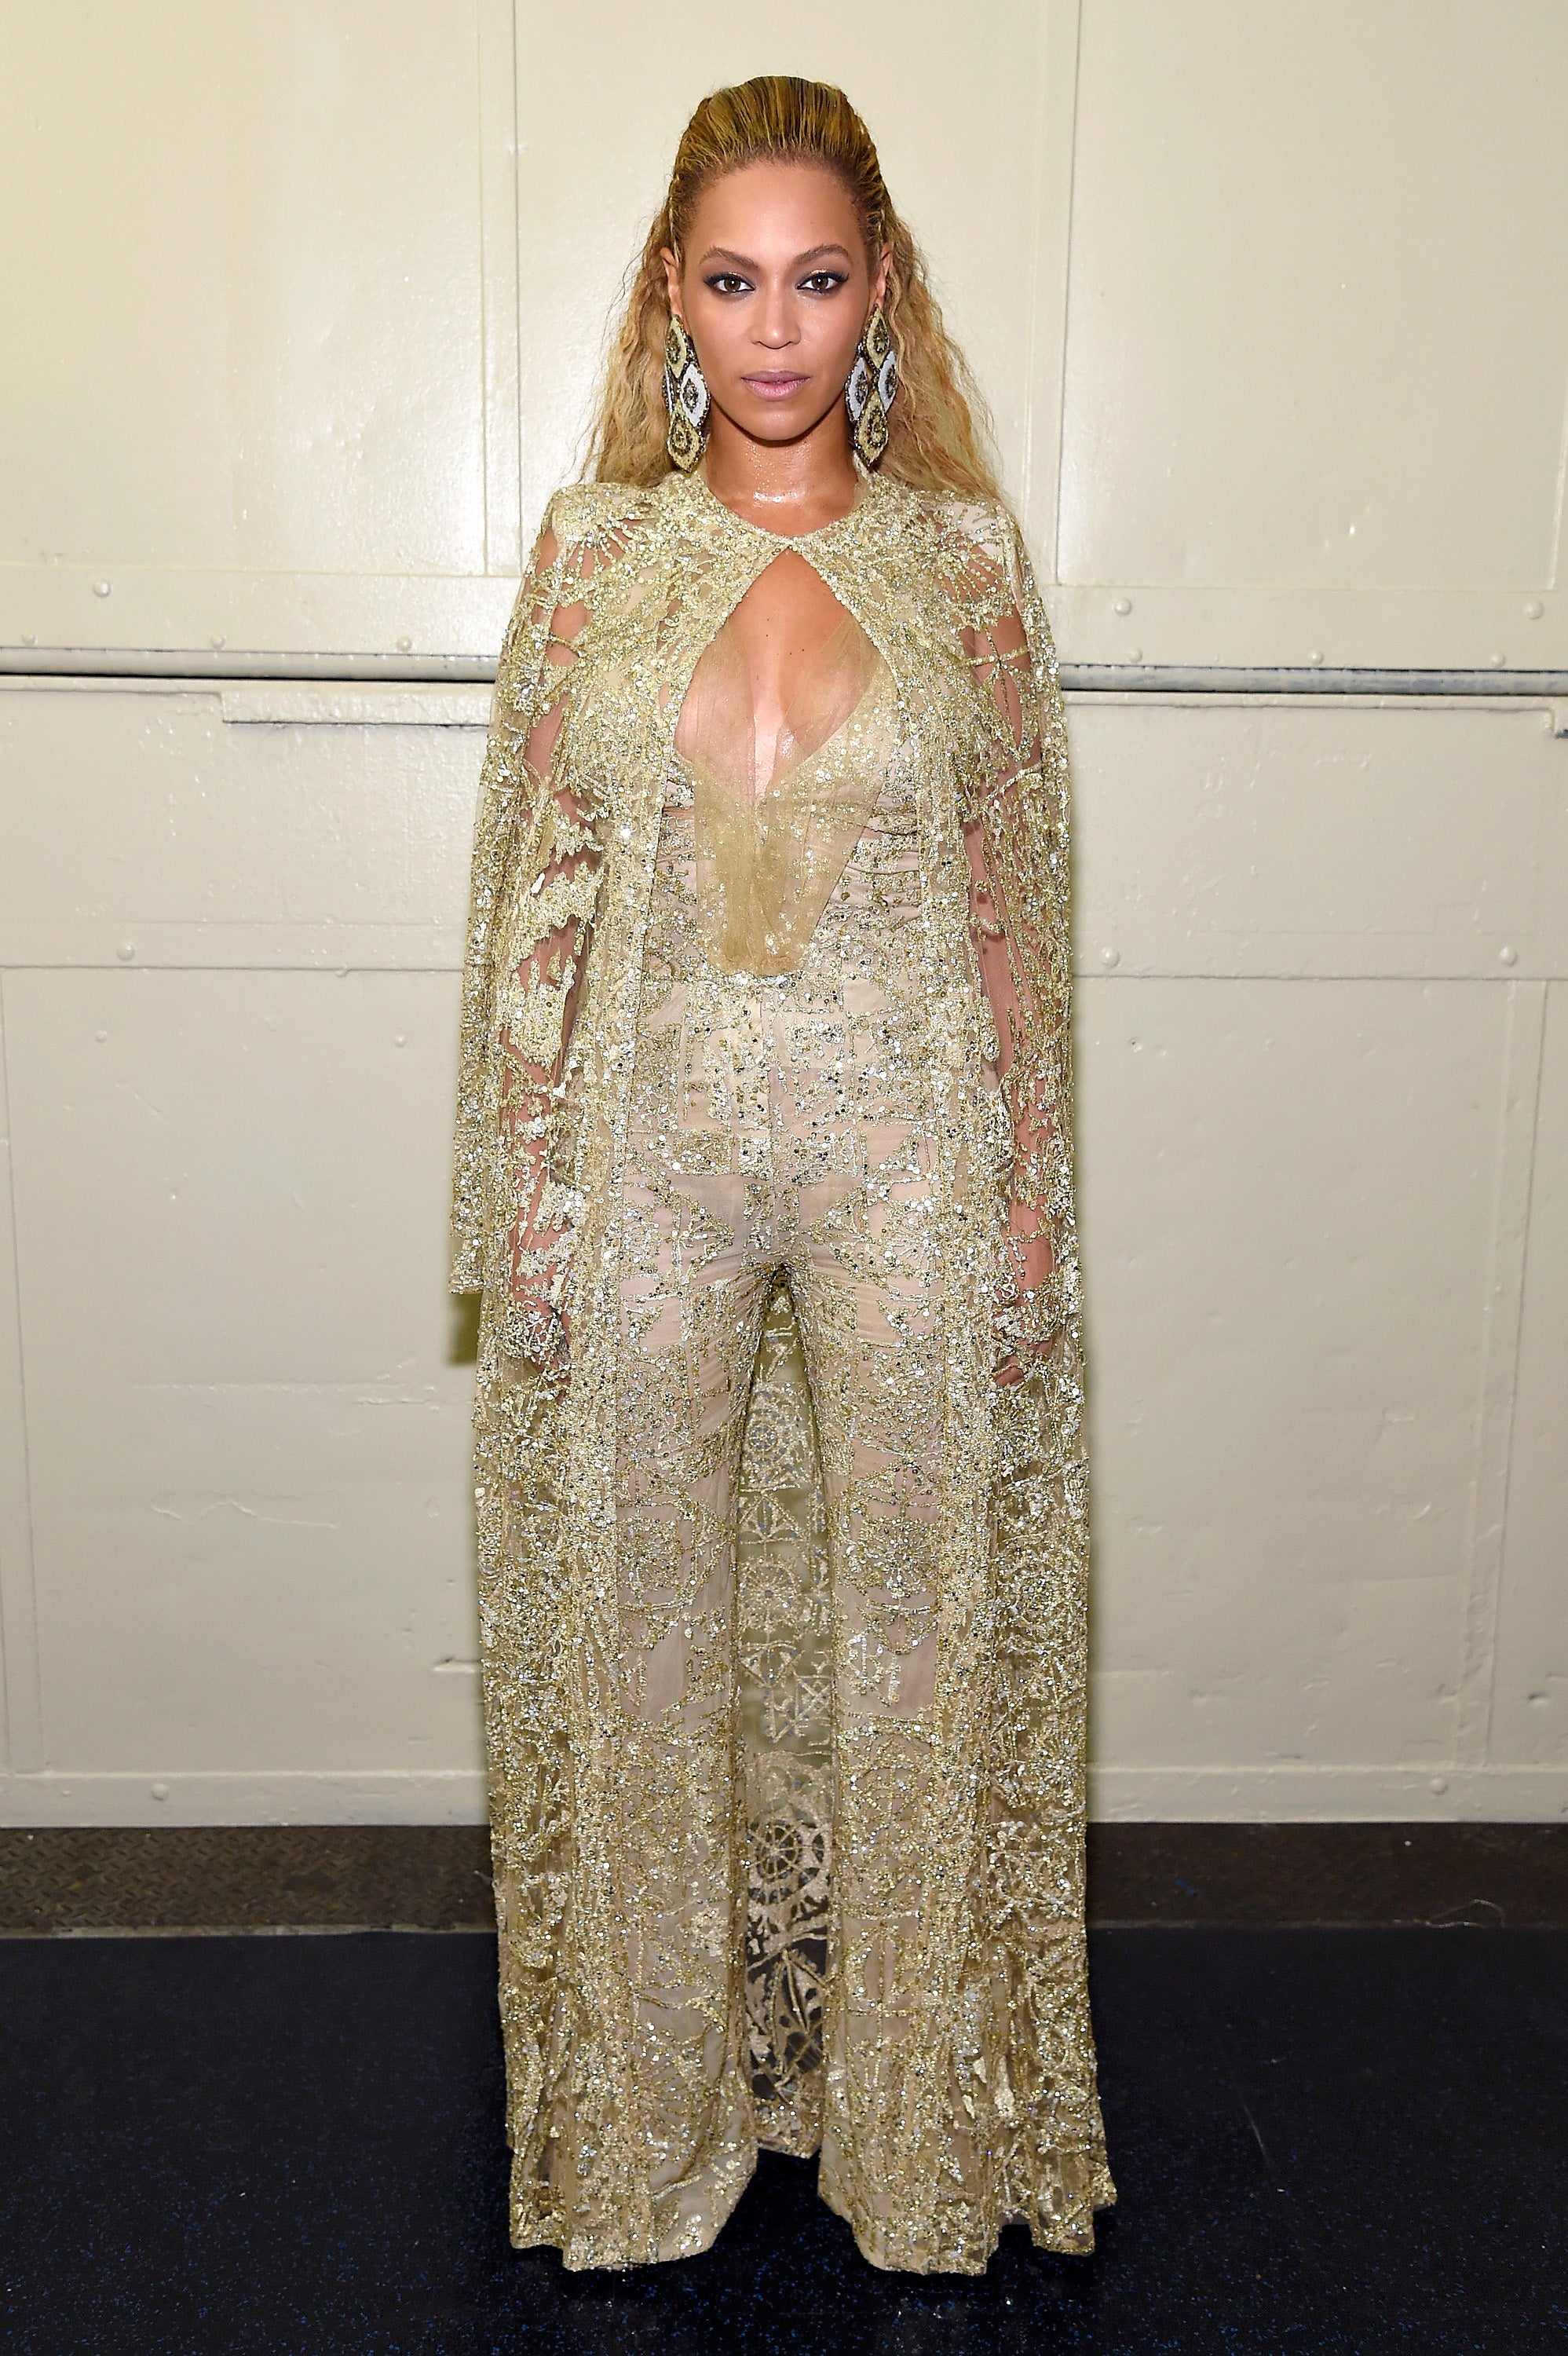 The Most Blinged Out Beyonce Fashion Moments Of All Time
